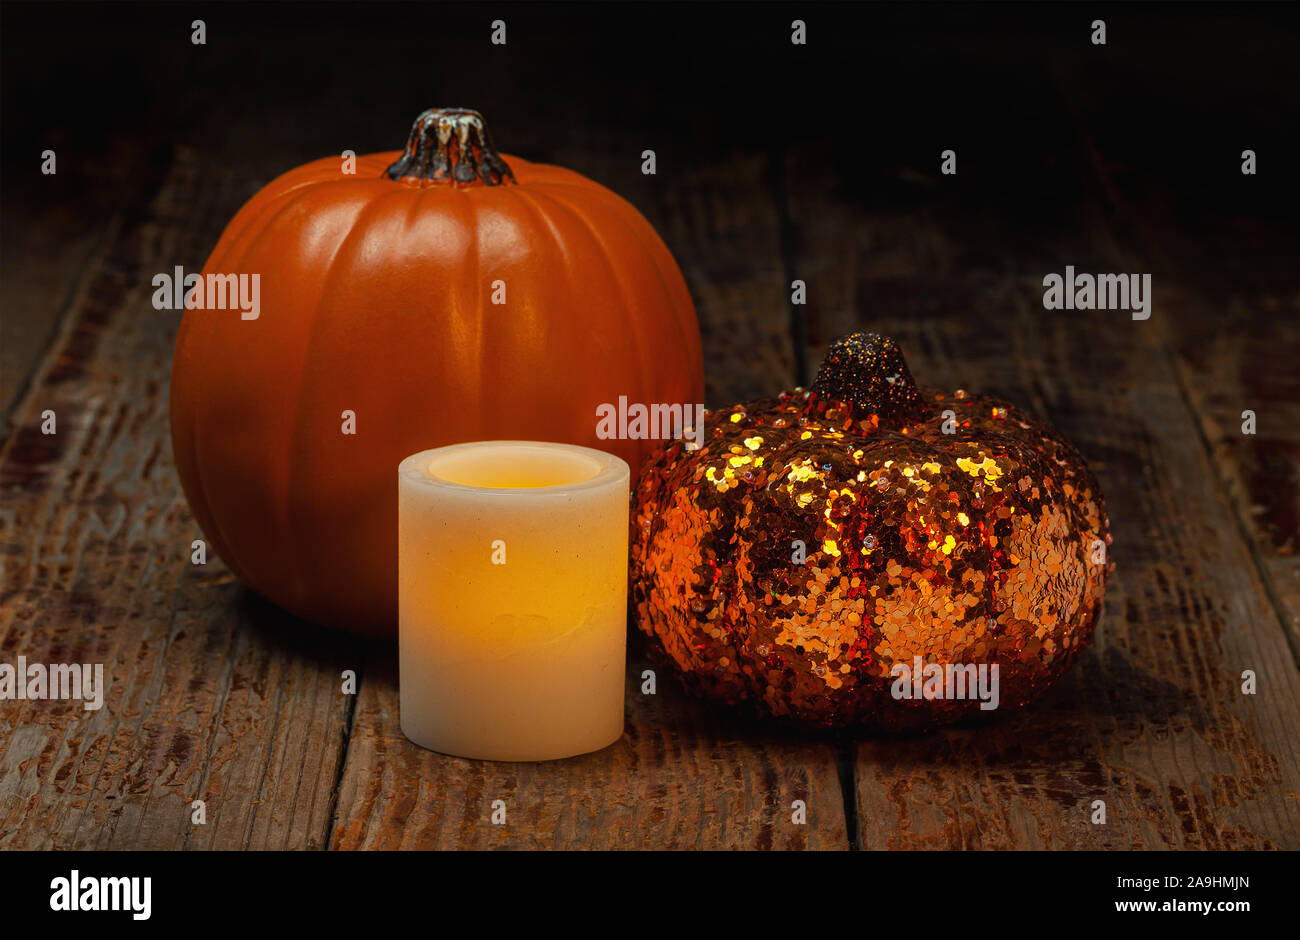 Halloween holiday still life of electric wax candle and pumpkins Stock Photo